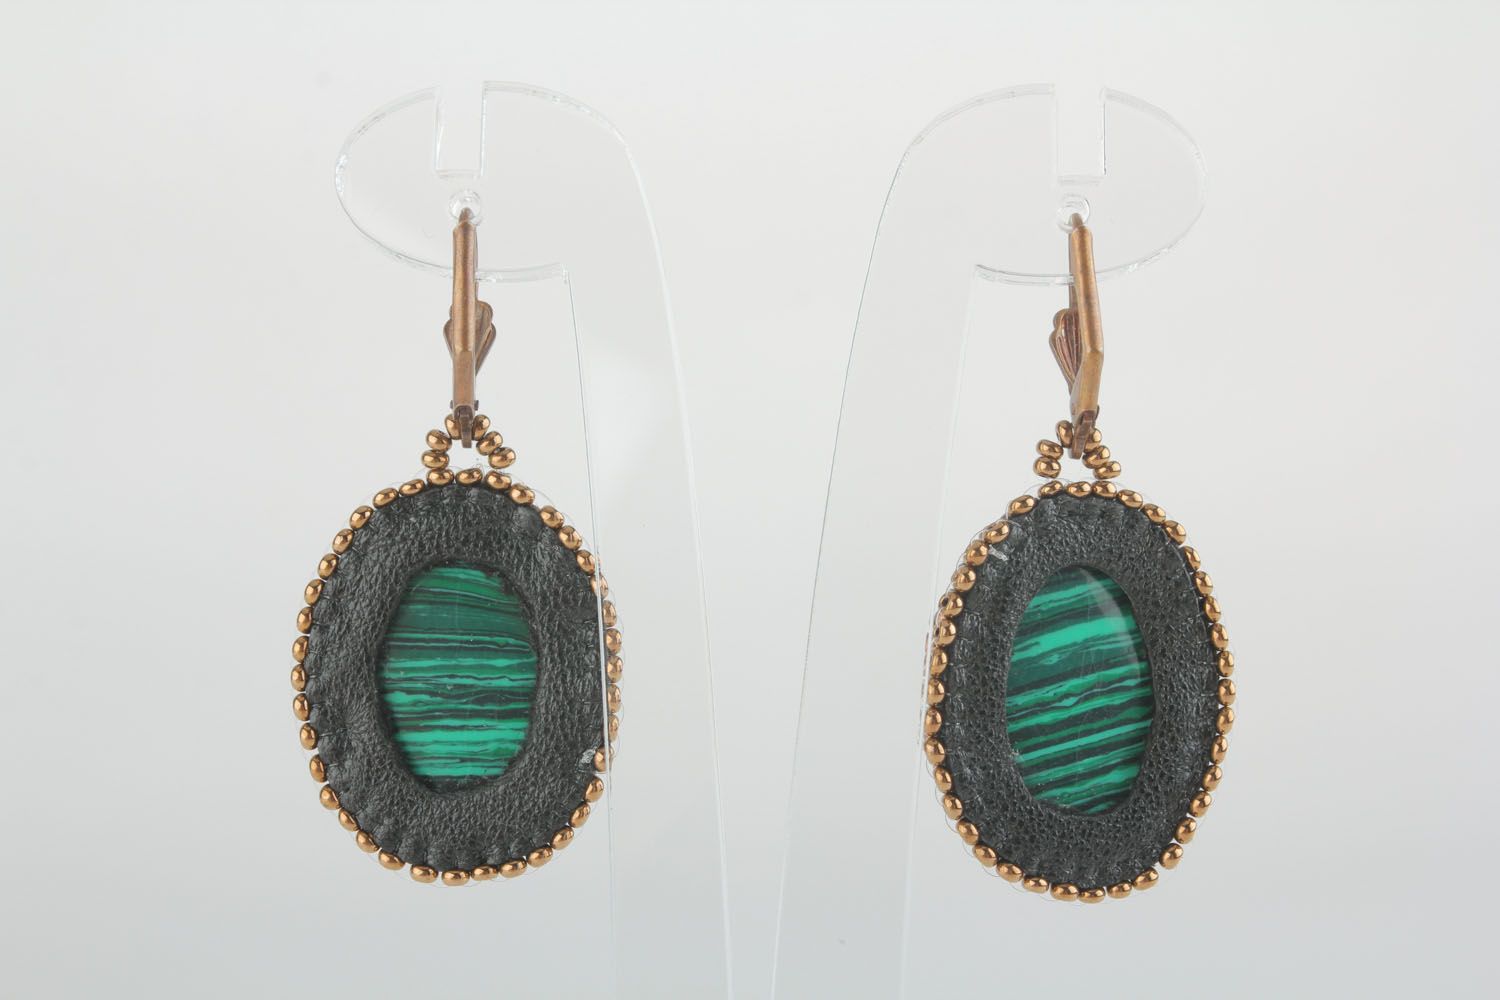 Earrings made of leather and malachite photo 2